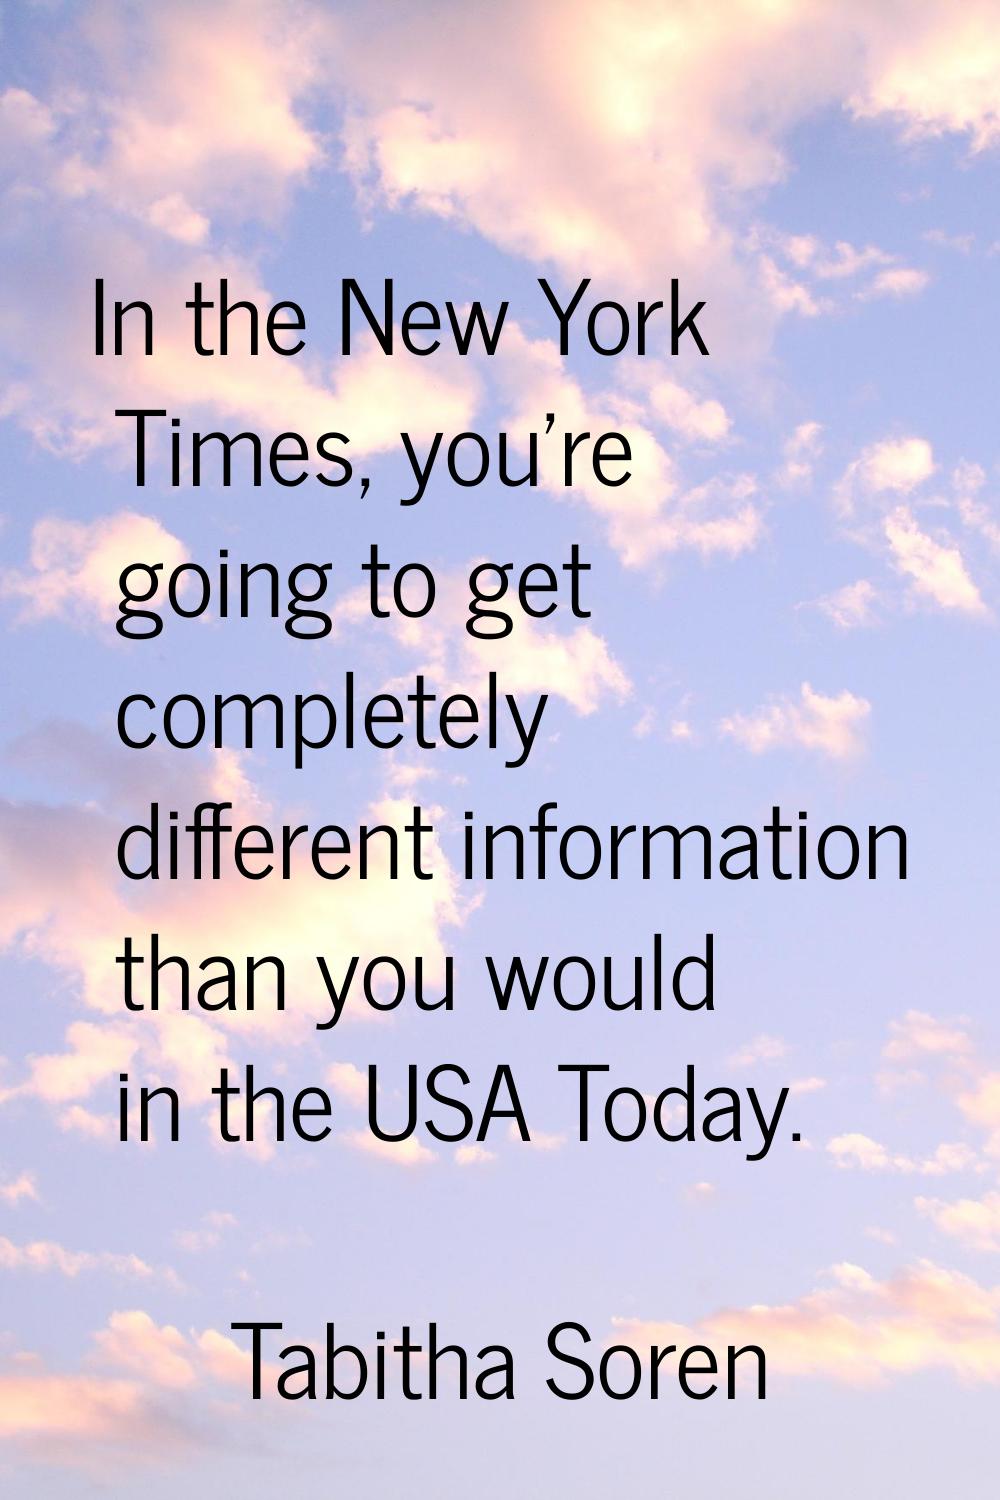 In the New York Times, you're going to get completely different information than you would in the U